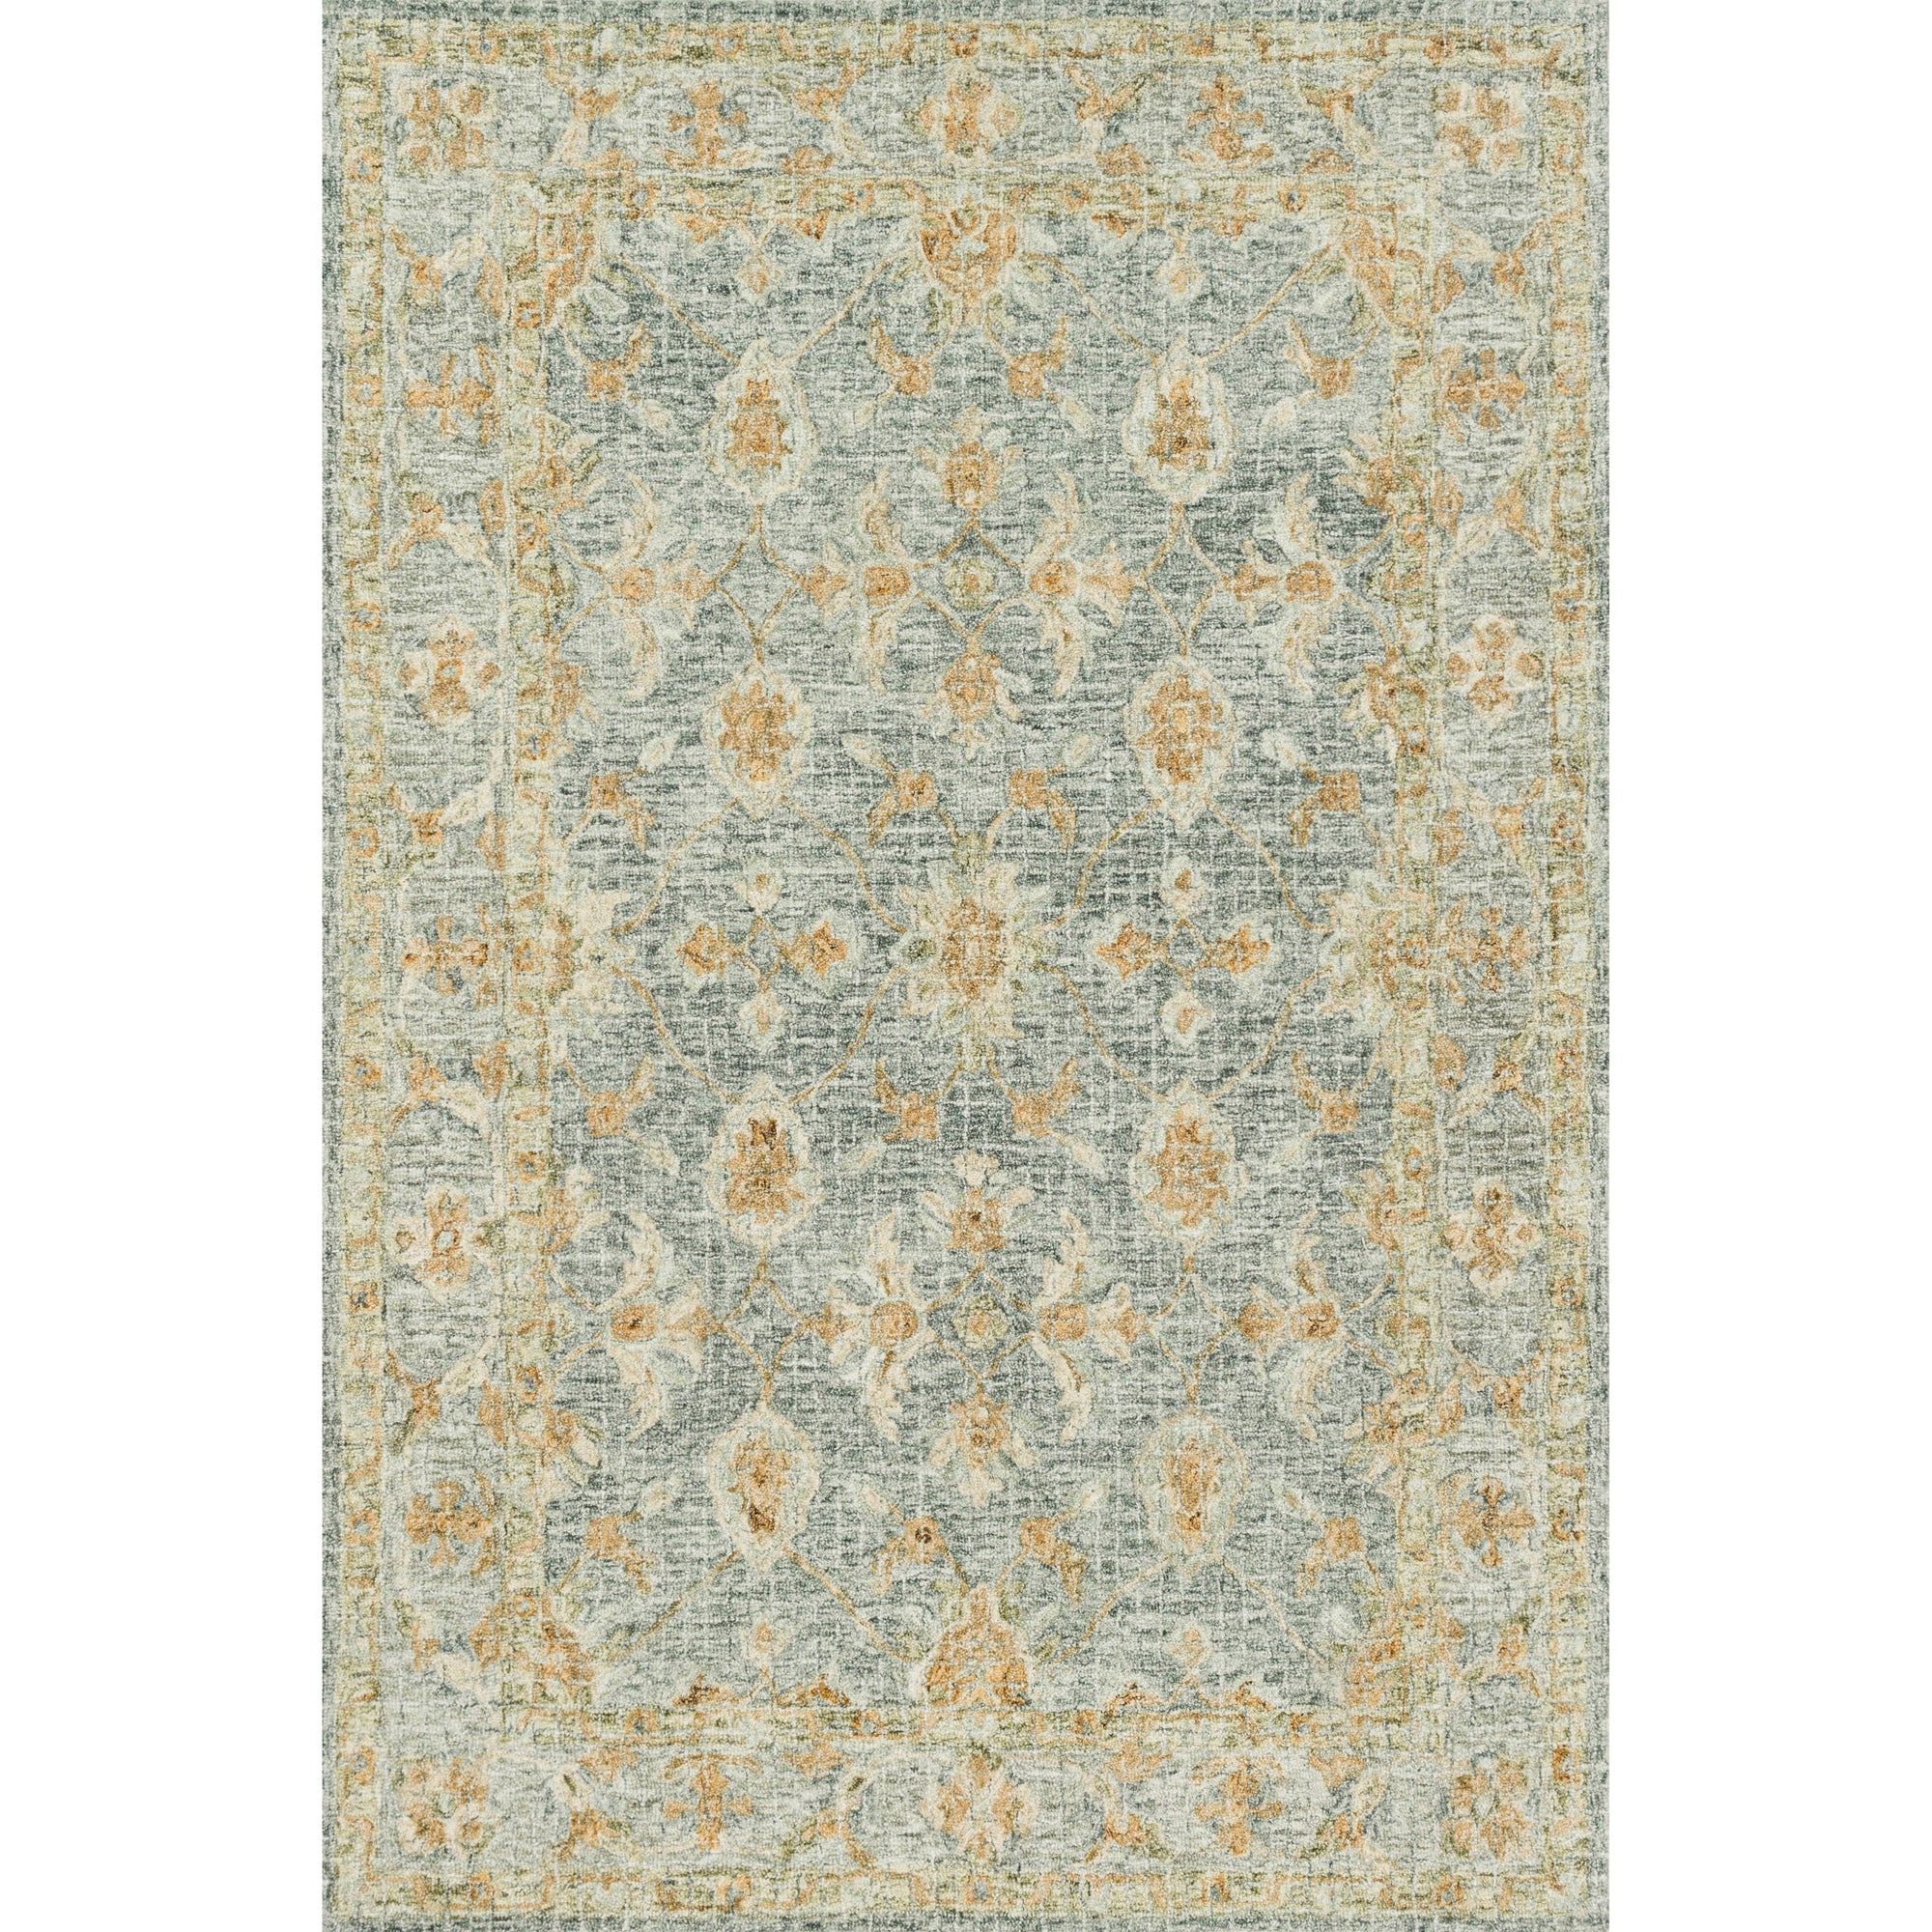 Rugs by Roo Loloi Julian Spa Spa Area Rug in size 18" x 18" Sample